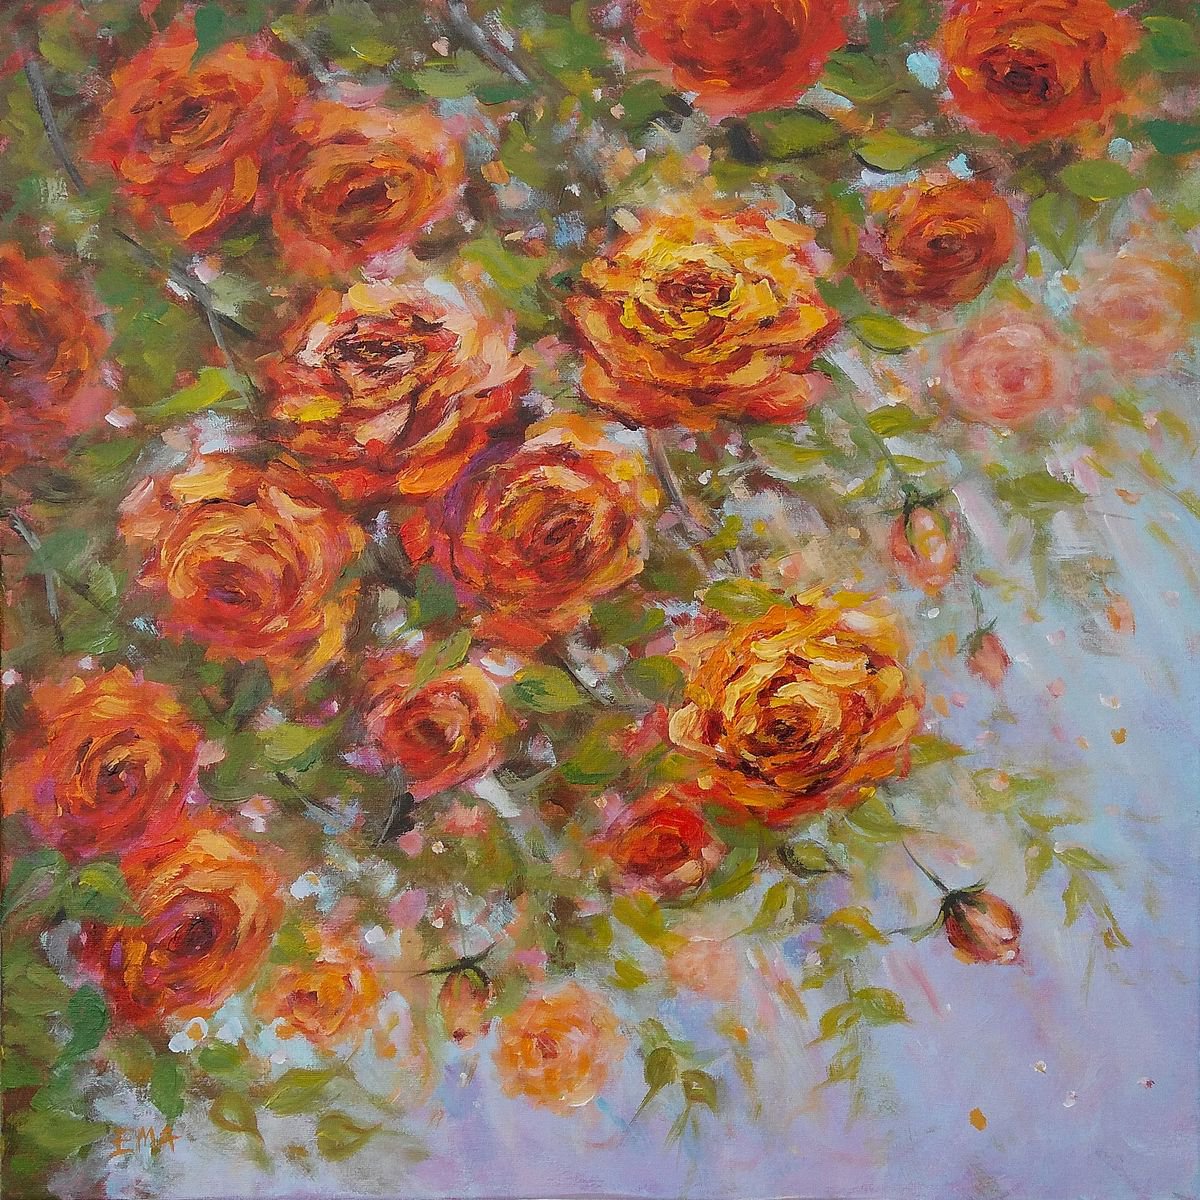 A PIECE OF JULY, 50x50cm blooming roses floral painting by Emilia Milcheva